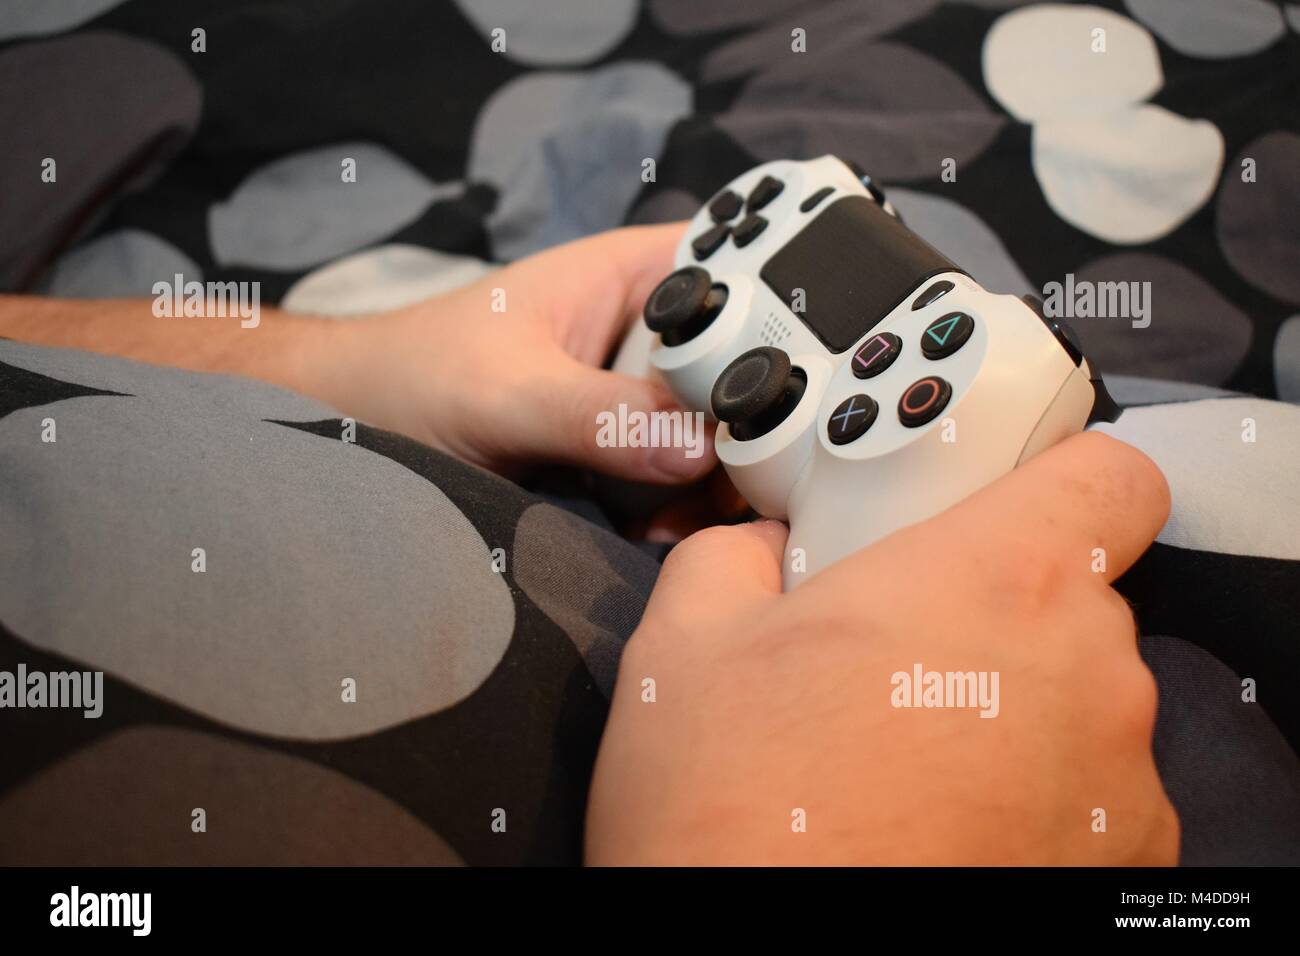 gaming system remote control Stock Photo